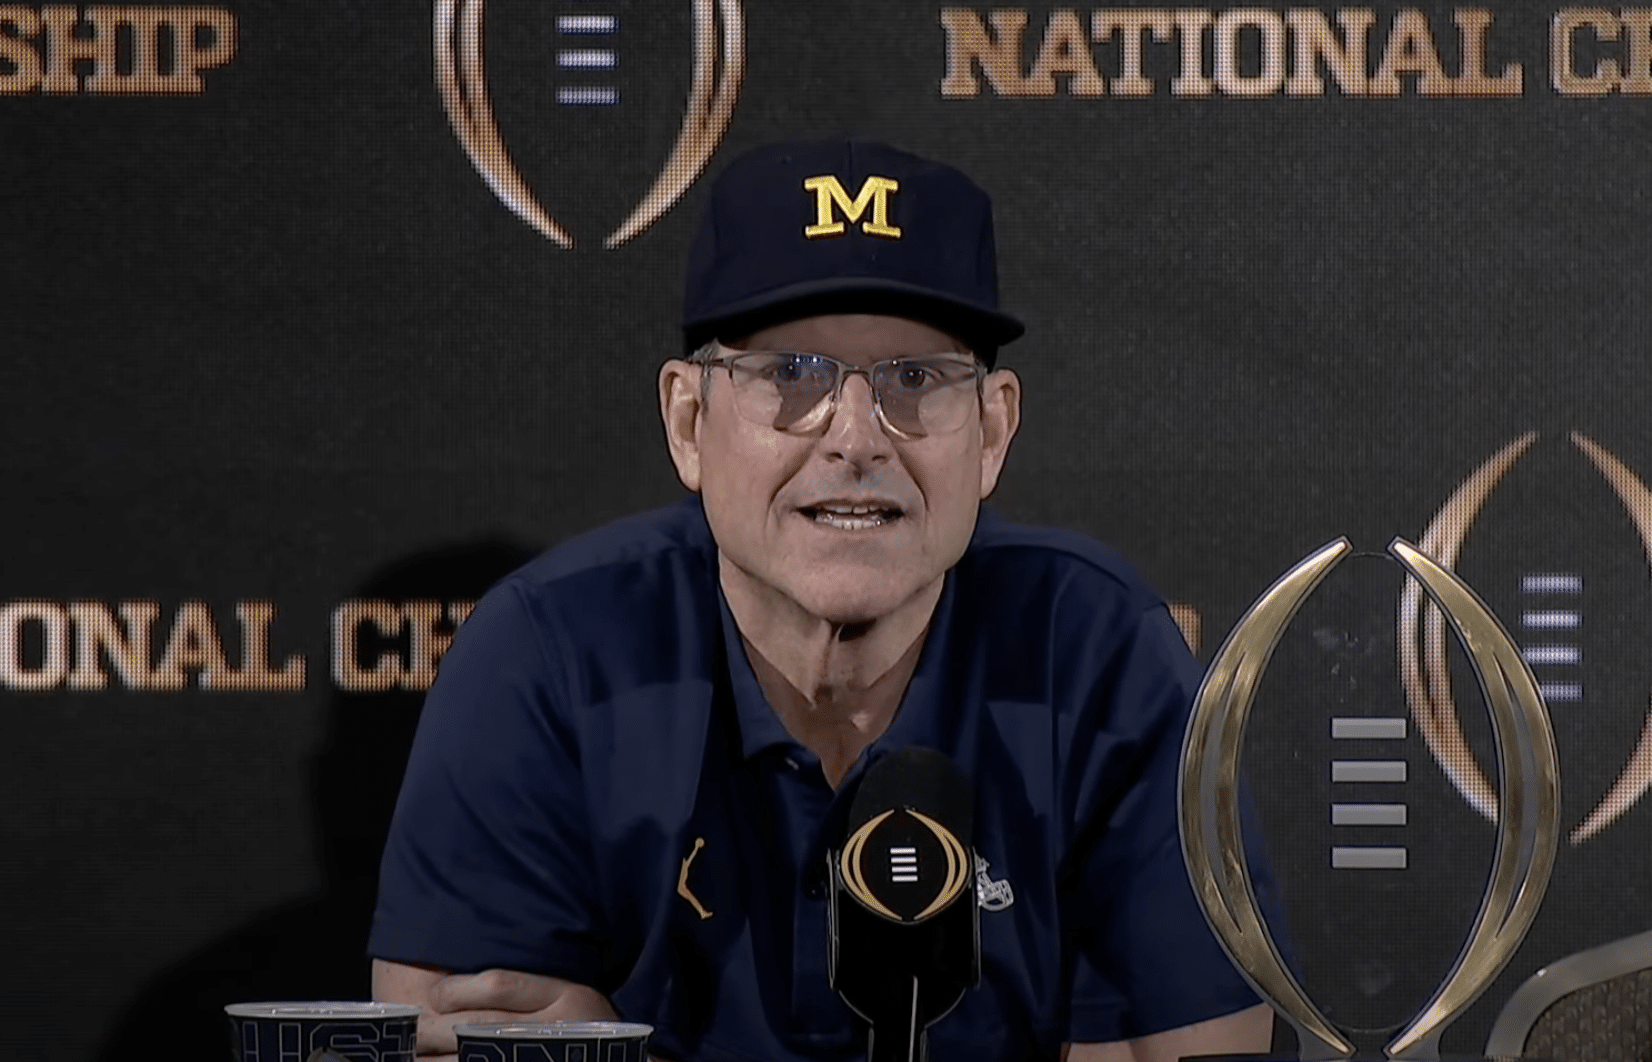 Jim Harbaugh reveals tattoo he will get NCAA President weighs in on fairness of Michigan Michigan head coach Jim Harbaugh lands interview Jim Harbaugh coaching odds Jim Harbaugh to meet Jim Harbaugh negotiations with Michigan